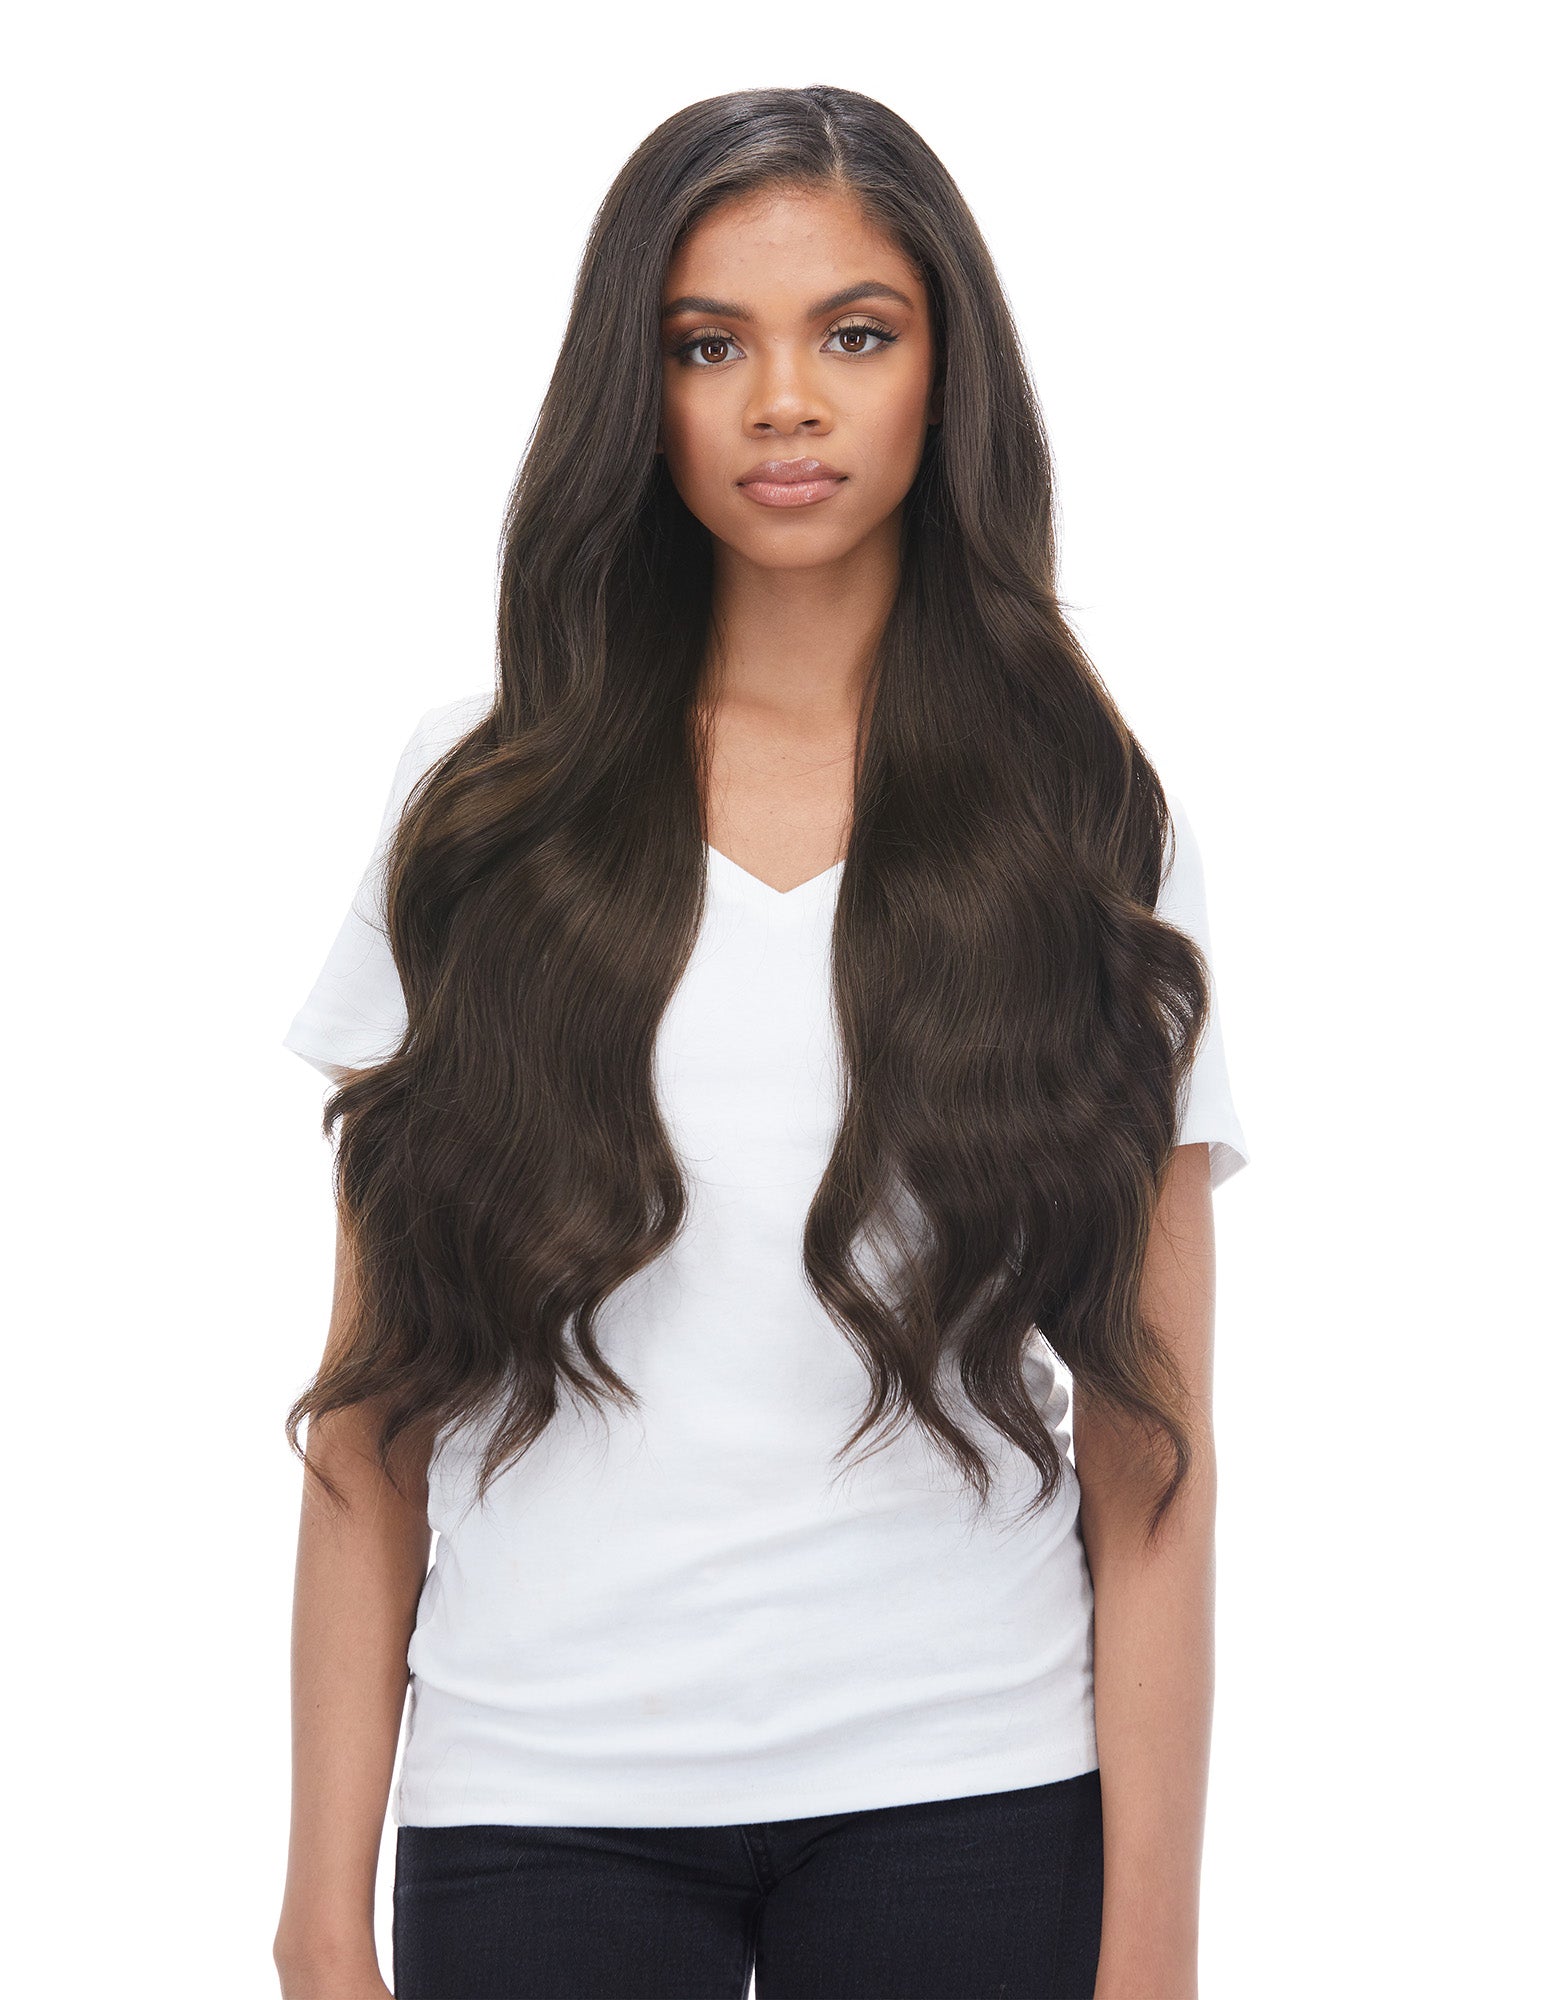 How To Choose The Best Hair Extensions And Why Ethical Weaves Never Come  Cheap